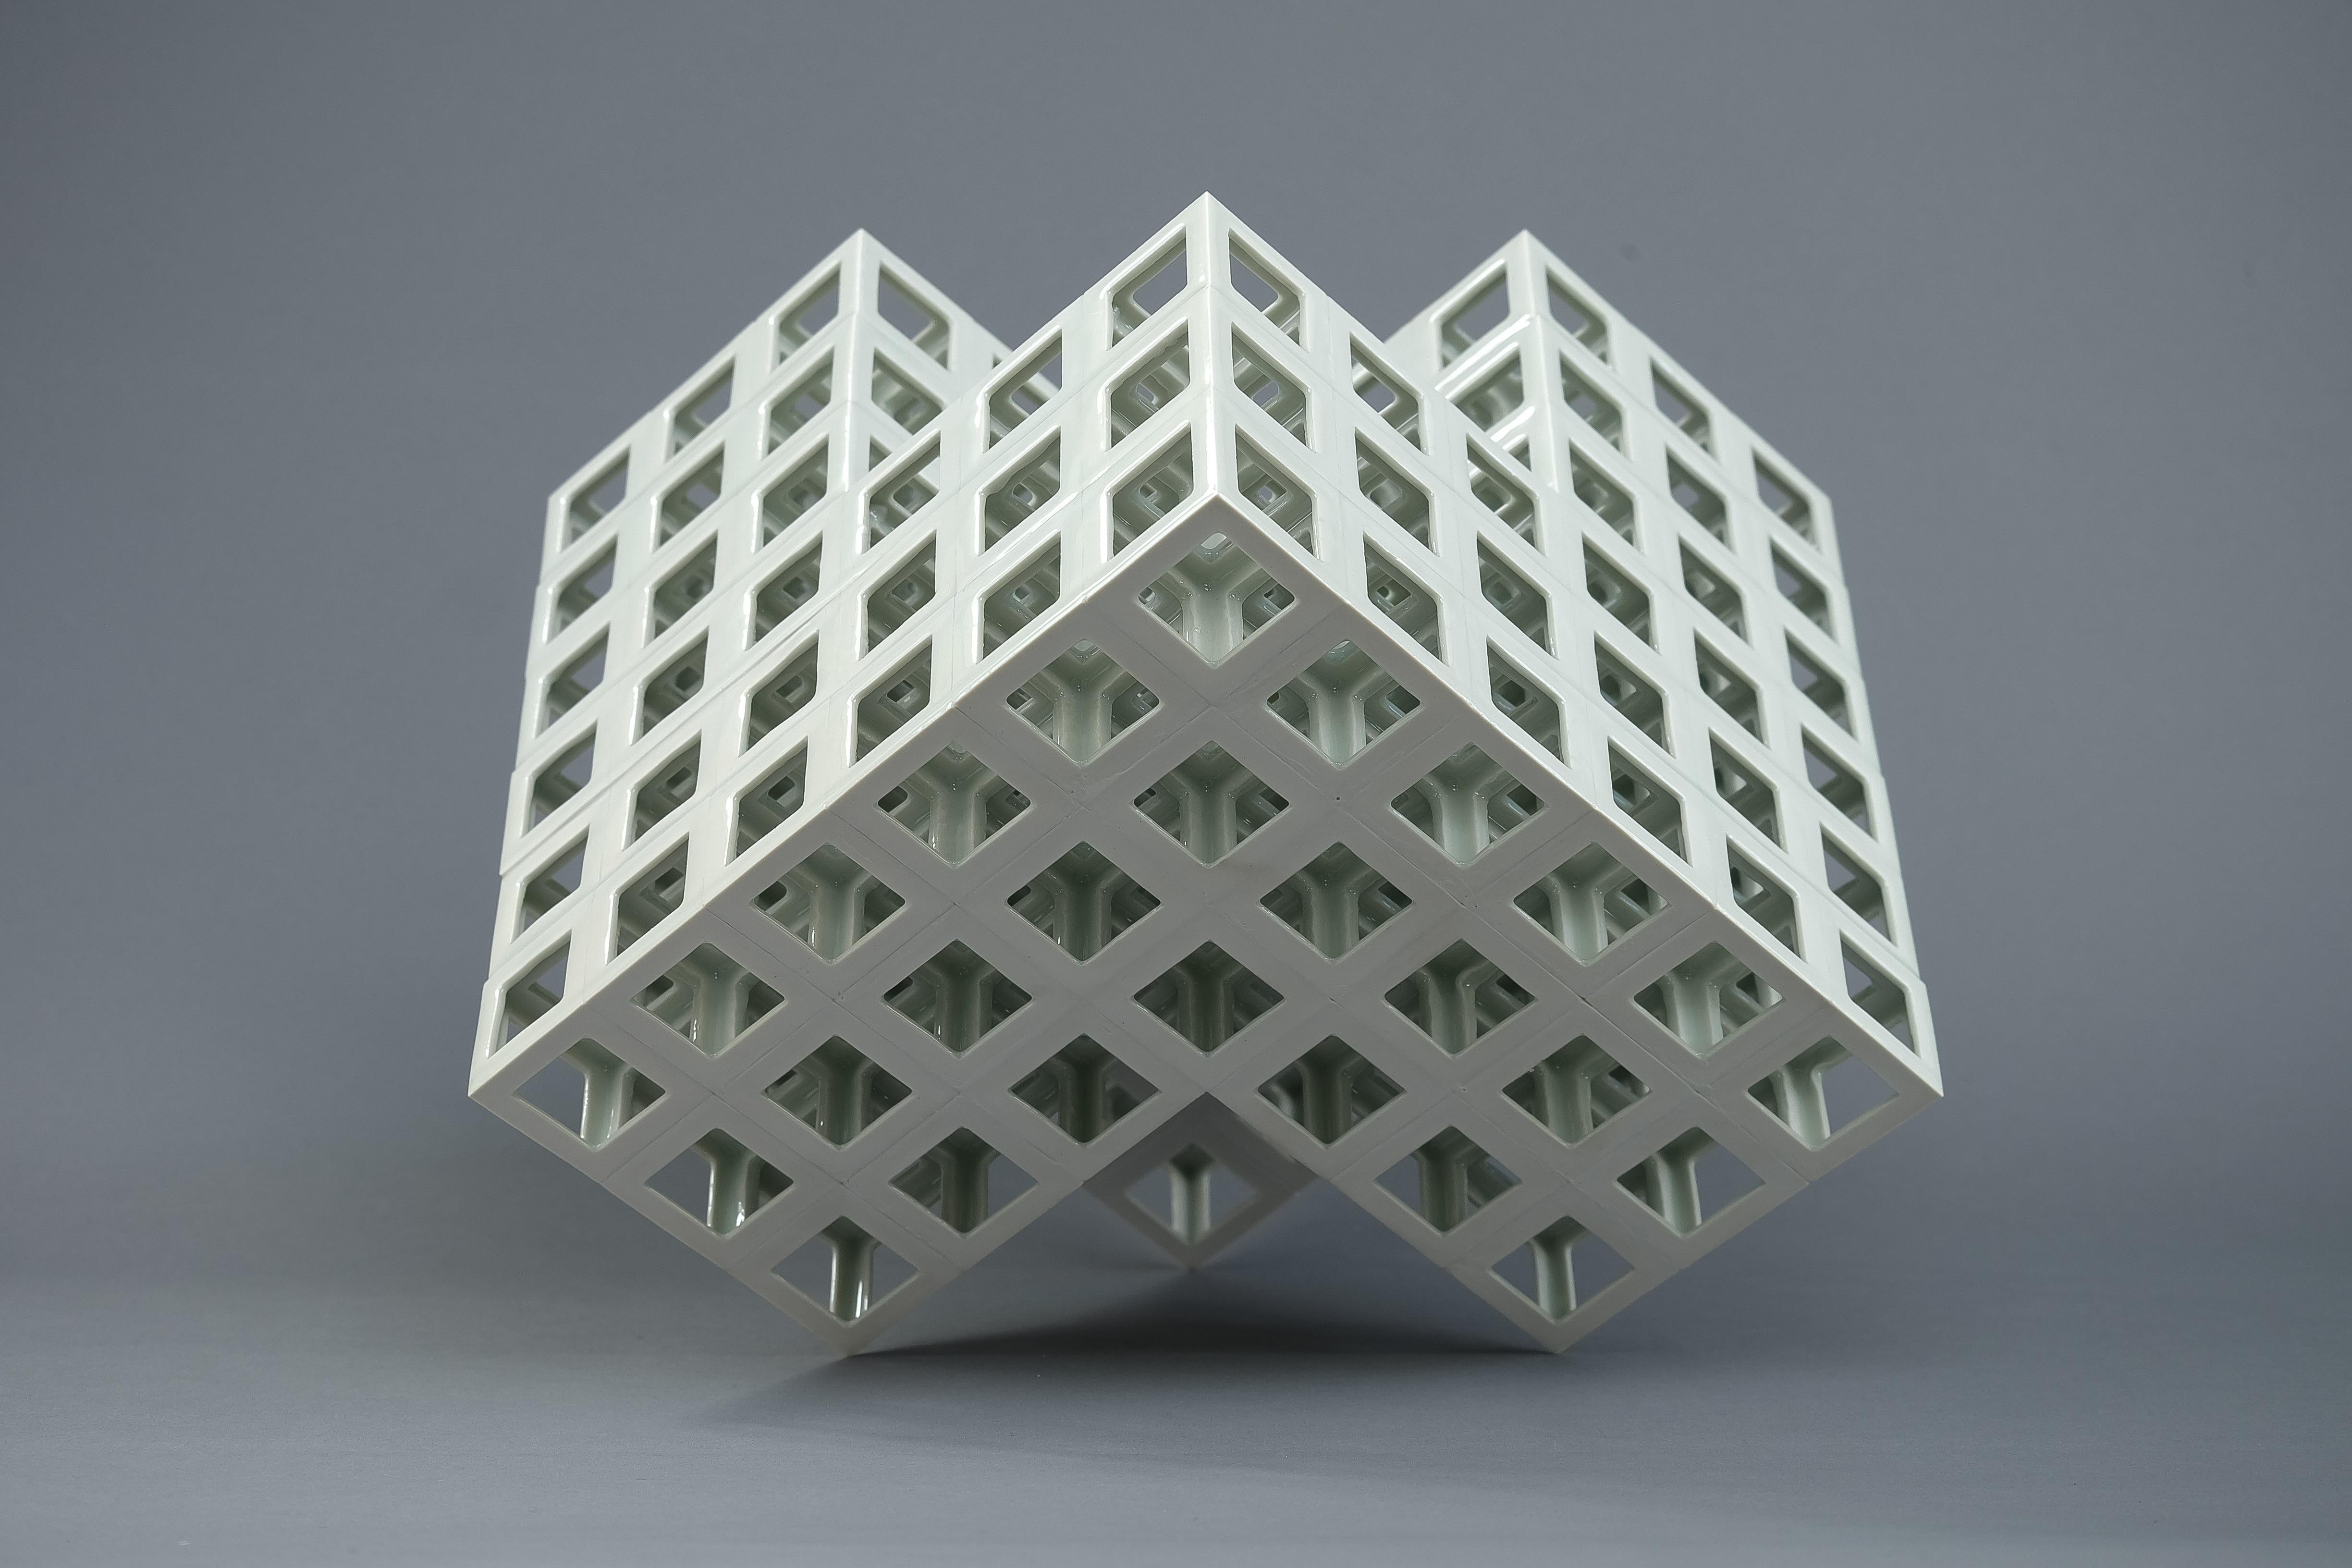 “Lattice receptacle” series is a work of art made out of porcelain lattice structure as a fundamental form. Its creation is constructed by the accumulation of the base unit (cubic hollow) that is formed regularly by slip casting technique. For his